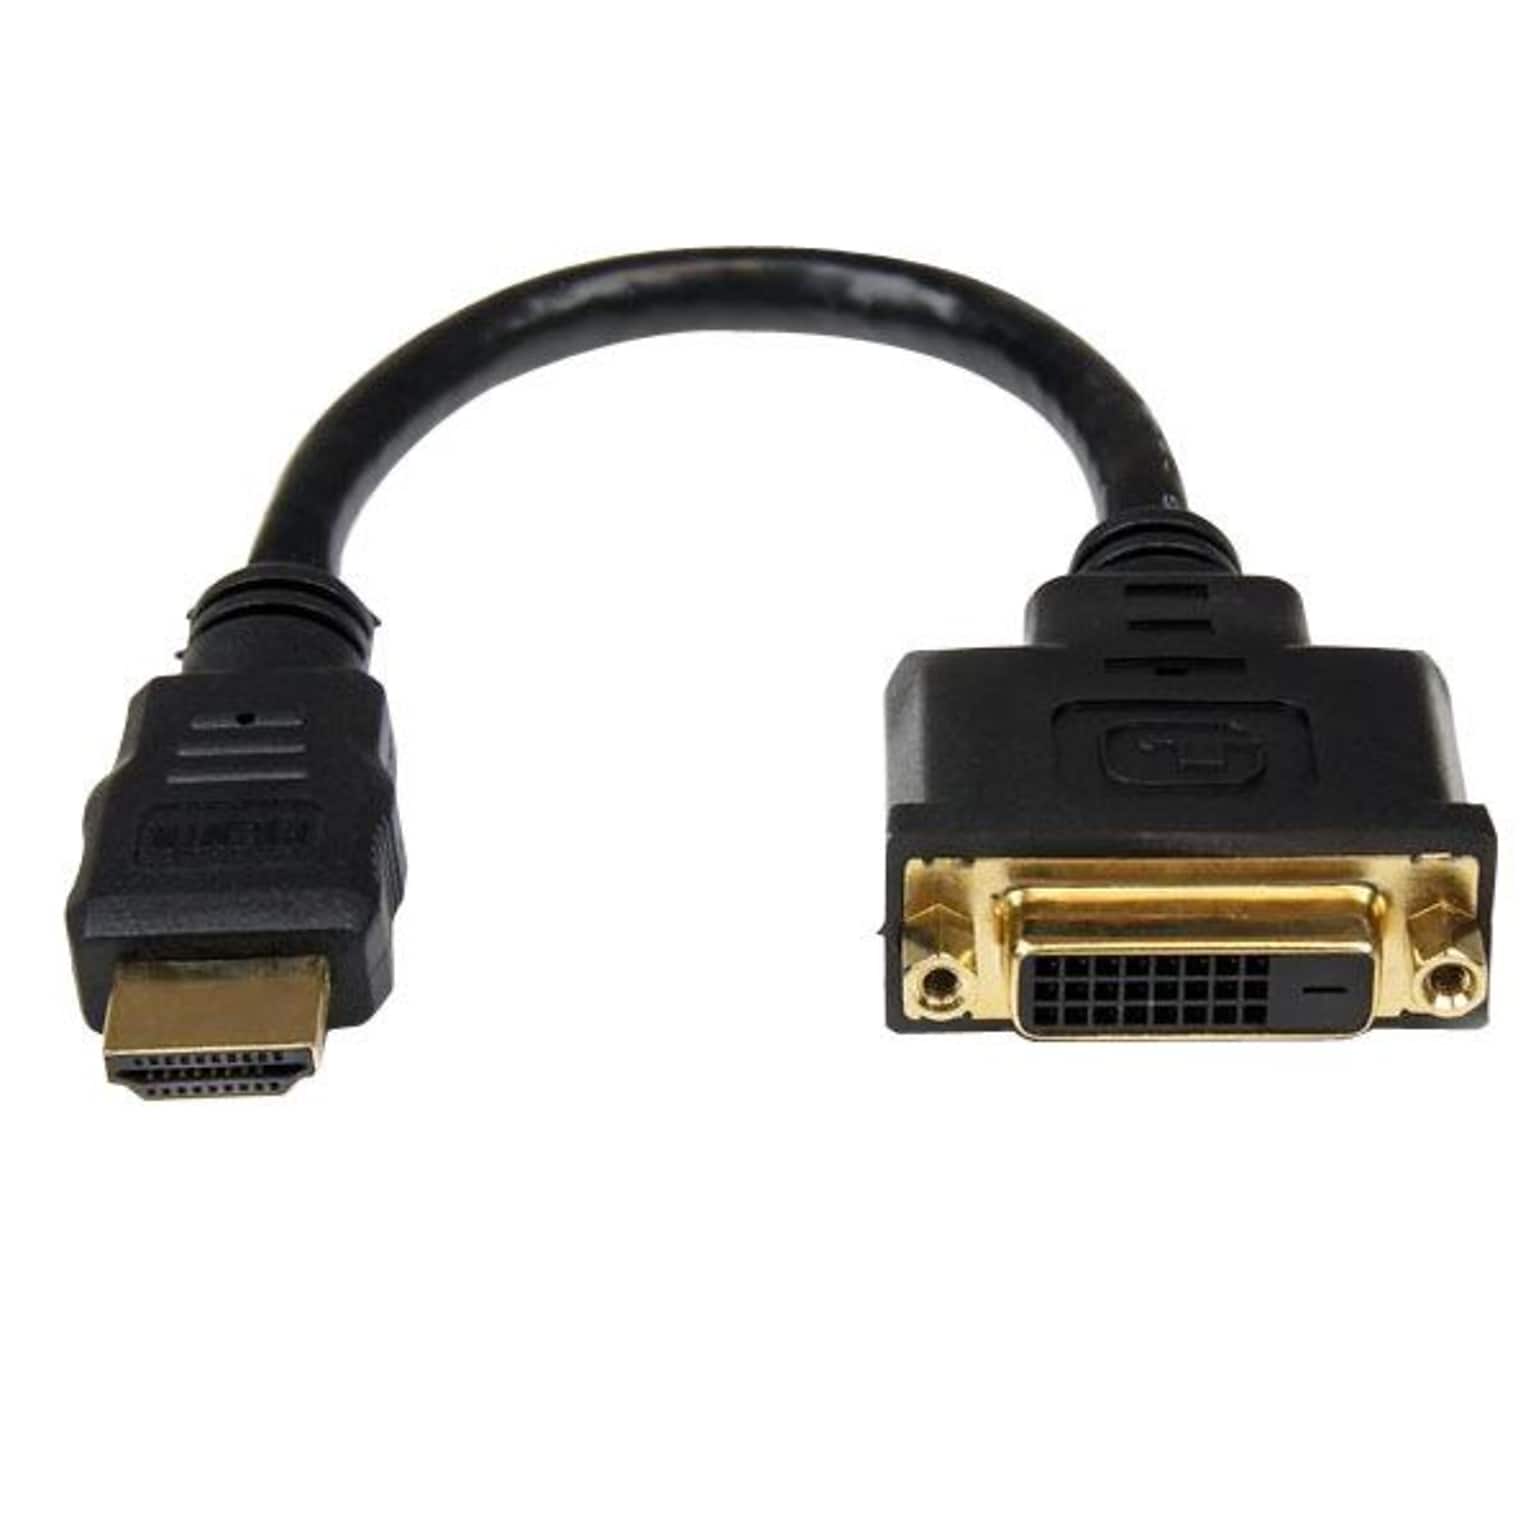 Startech 8 Male HDMI To Female DVI-D Video Cable Adapter, Black